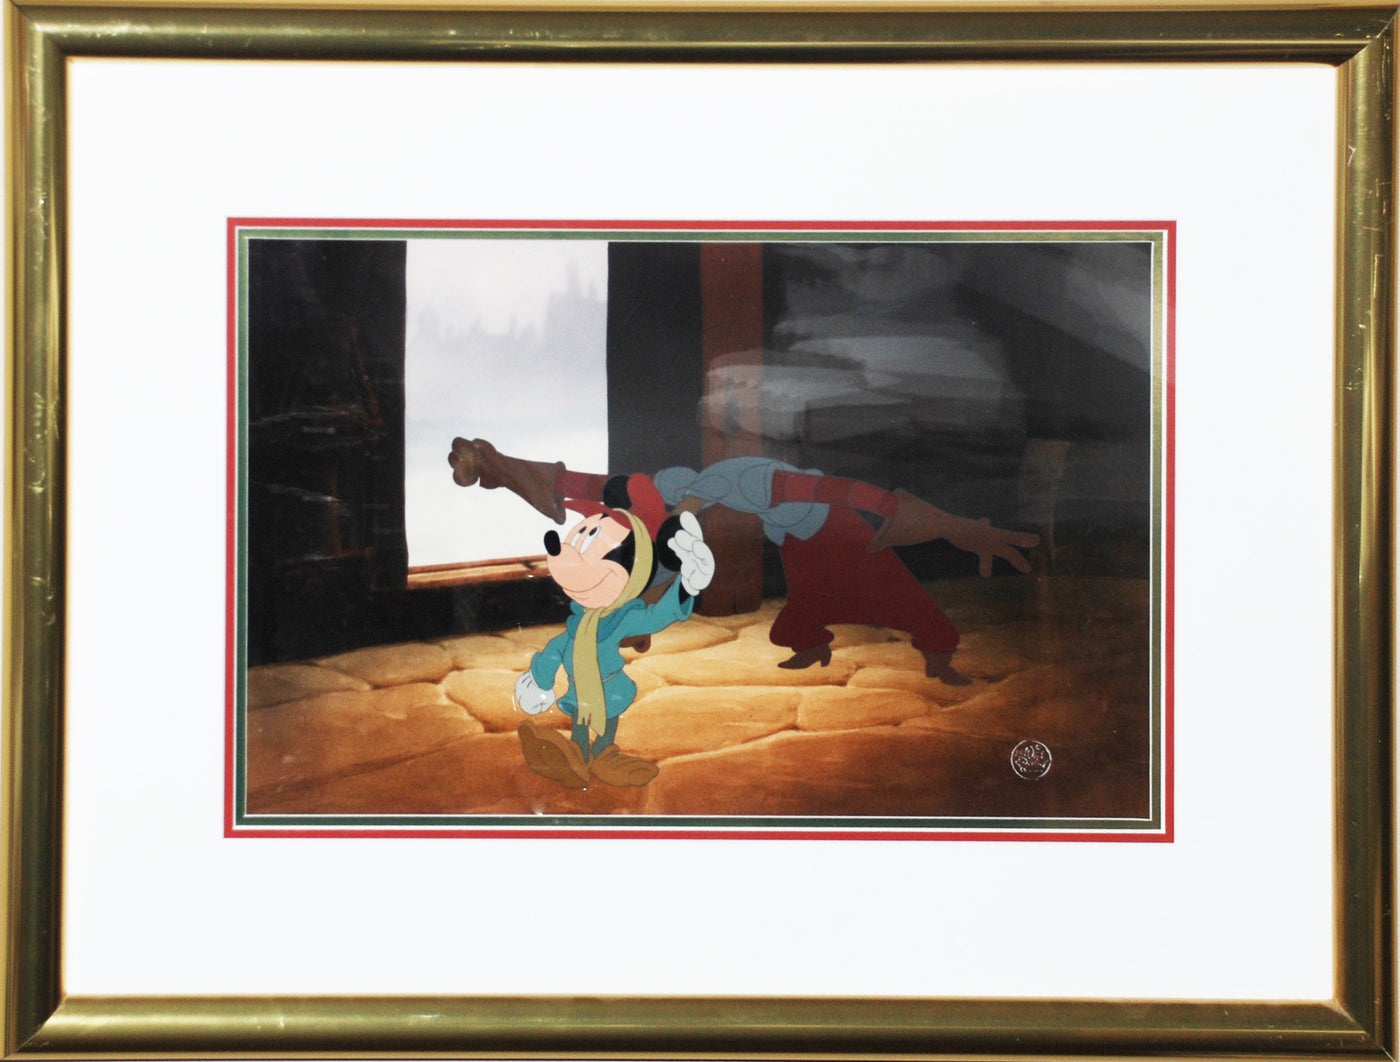 Original Walt Disney Production Cel from The Prince & the Pauper featuring Mickey Mouse